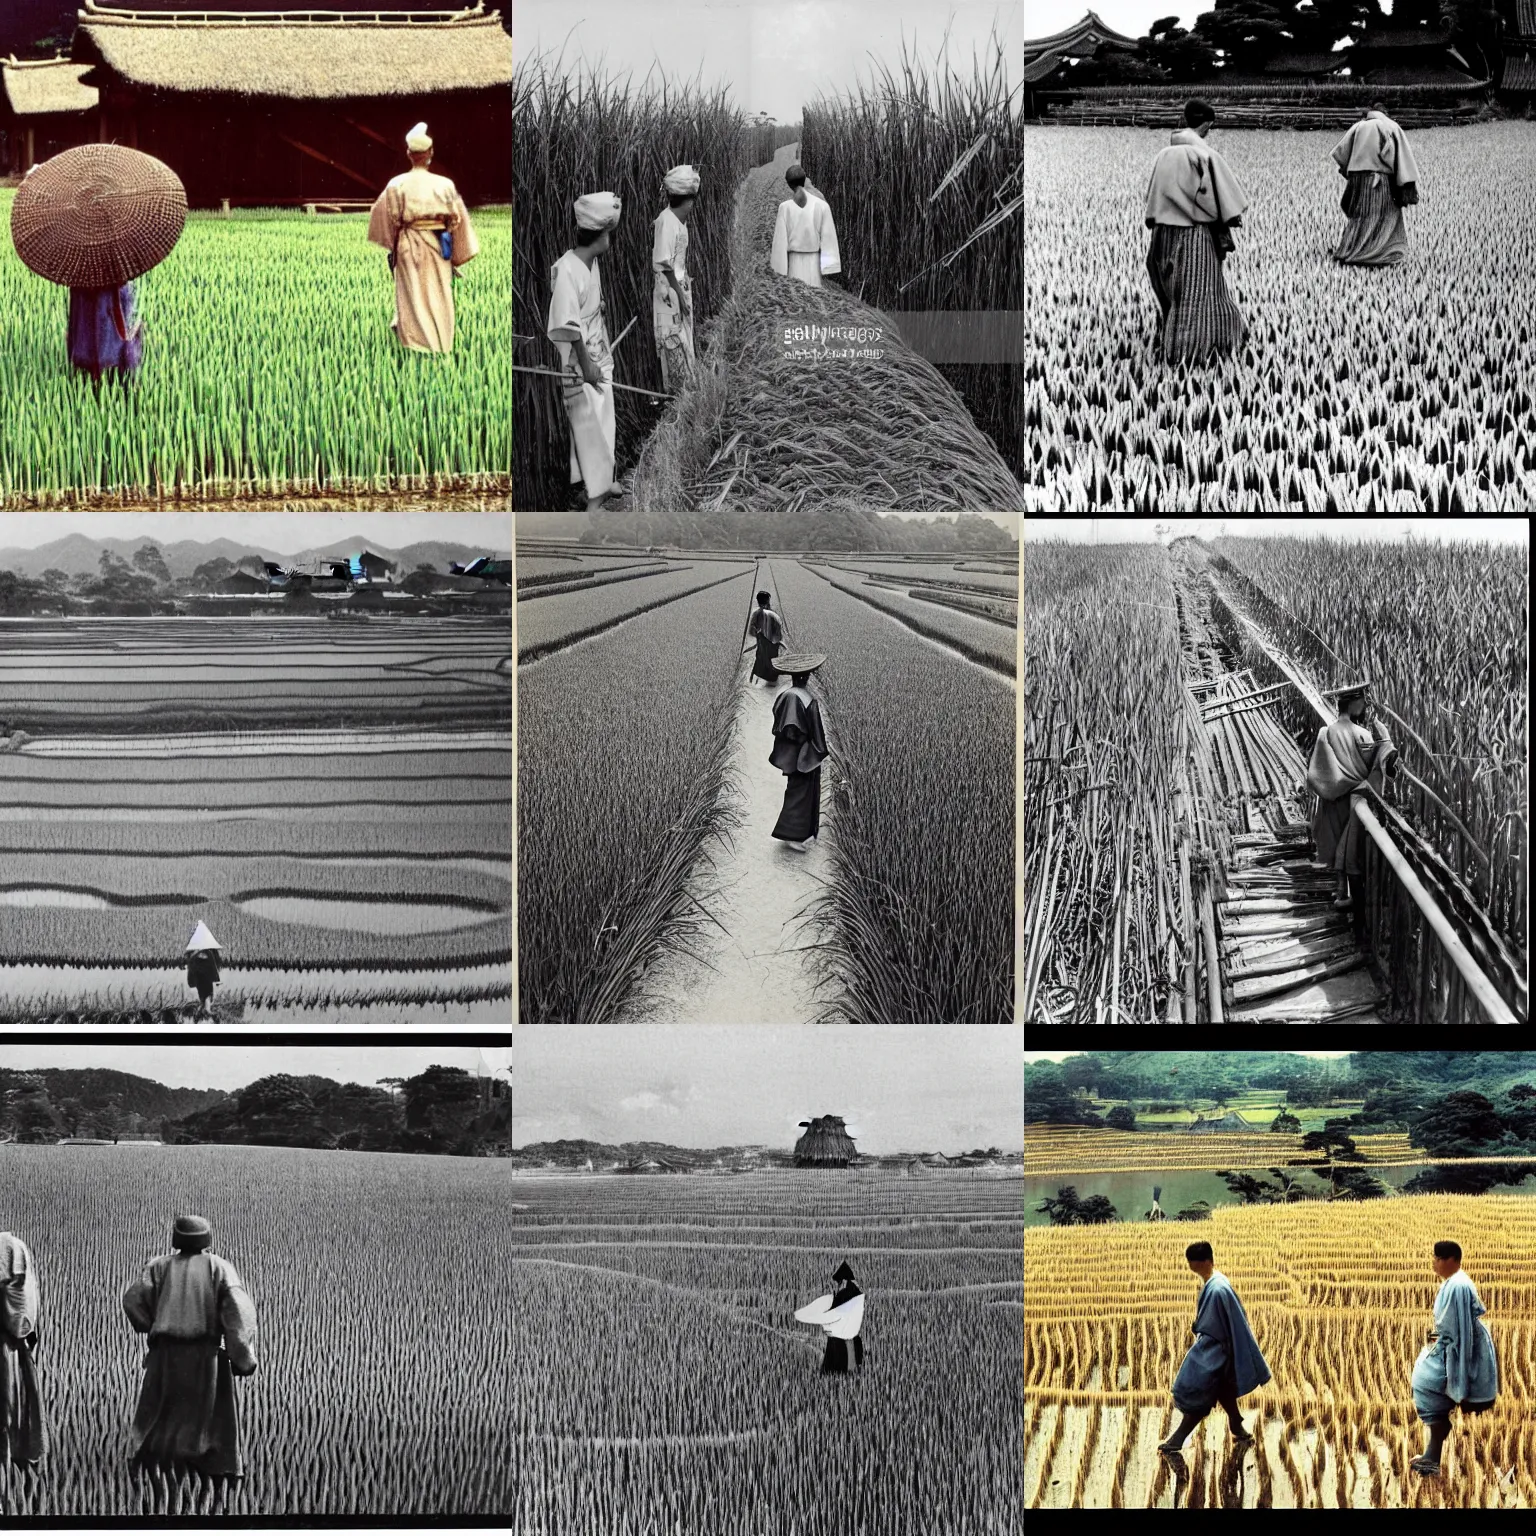 Prompt: seven ronins walk through rice fields, medieval Japan, silhuets, movie 47 ronins 1941